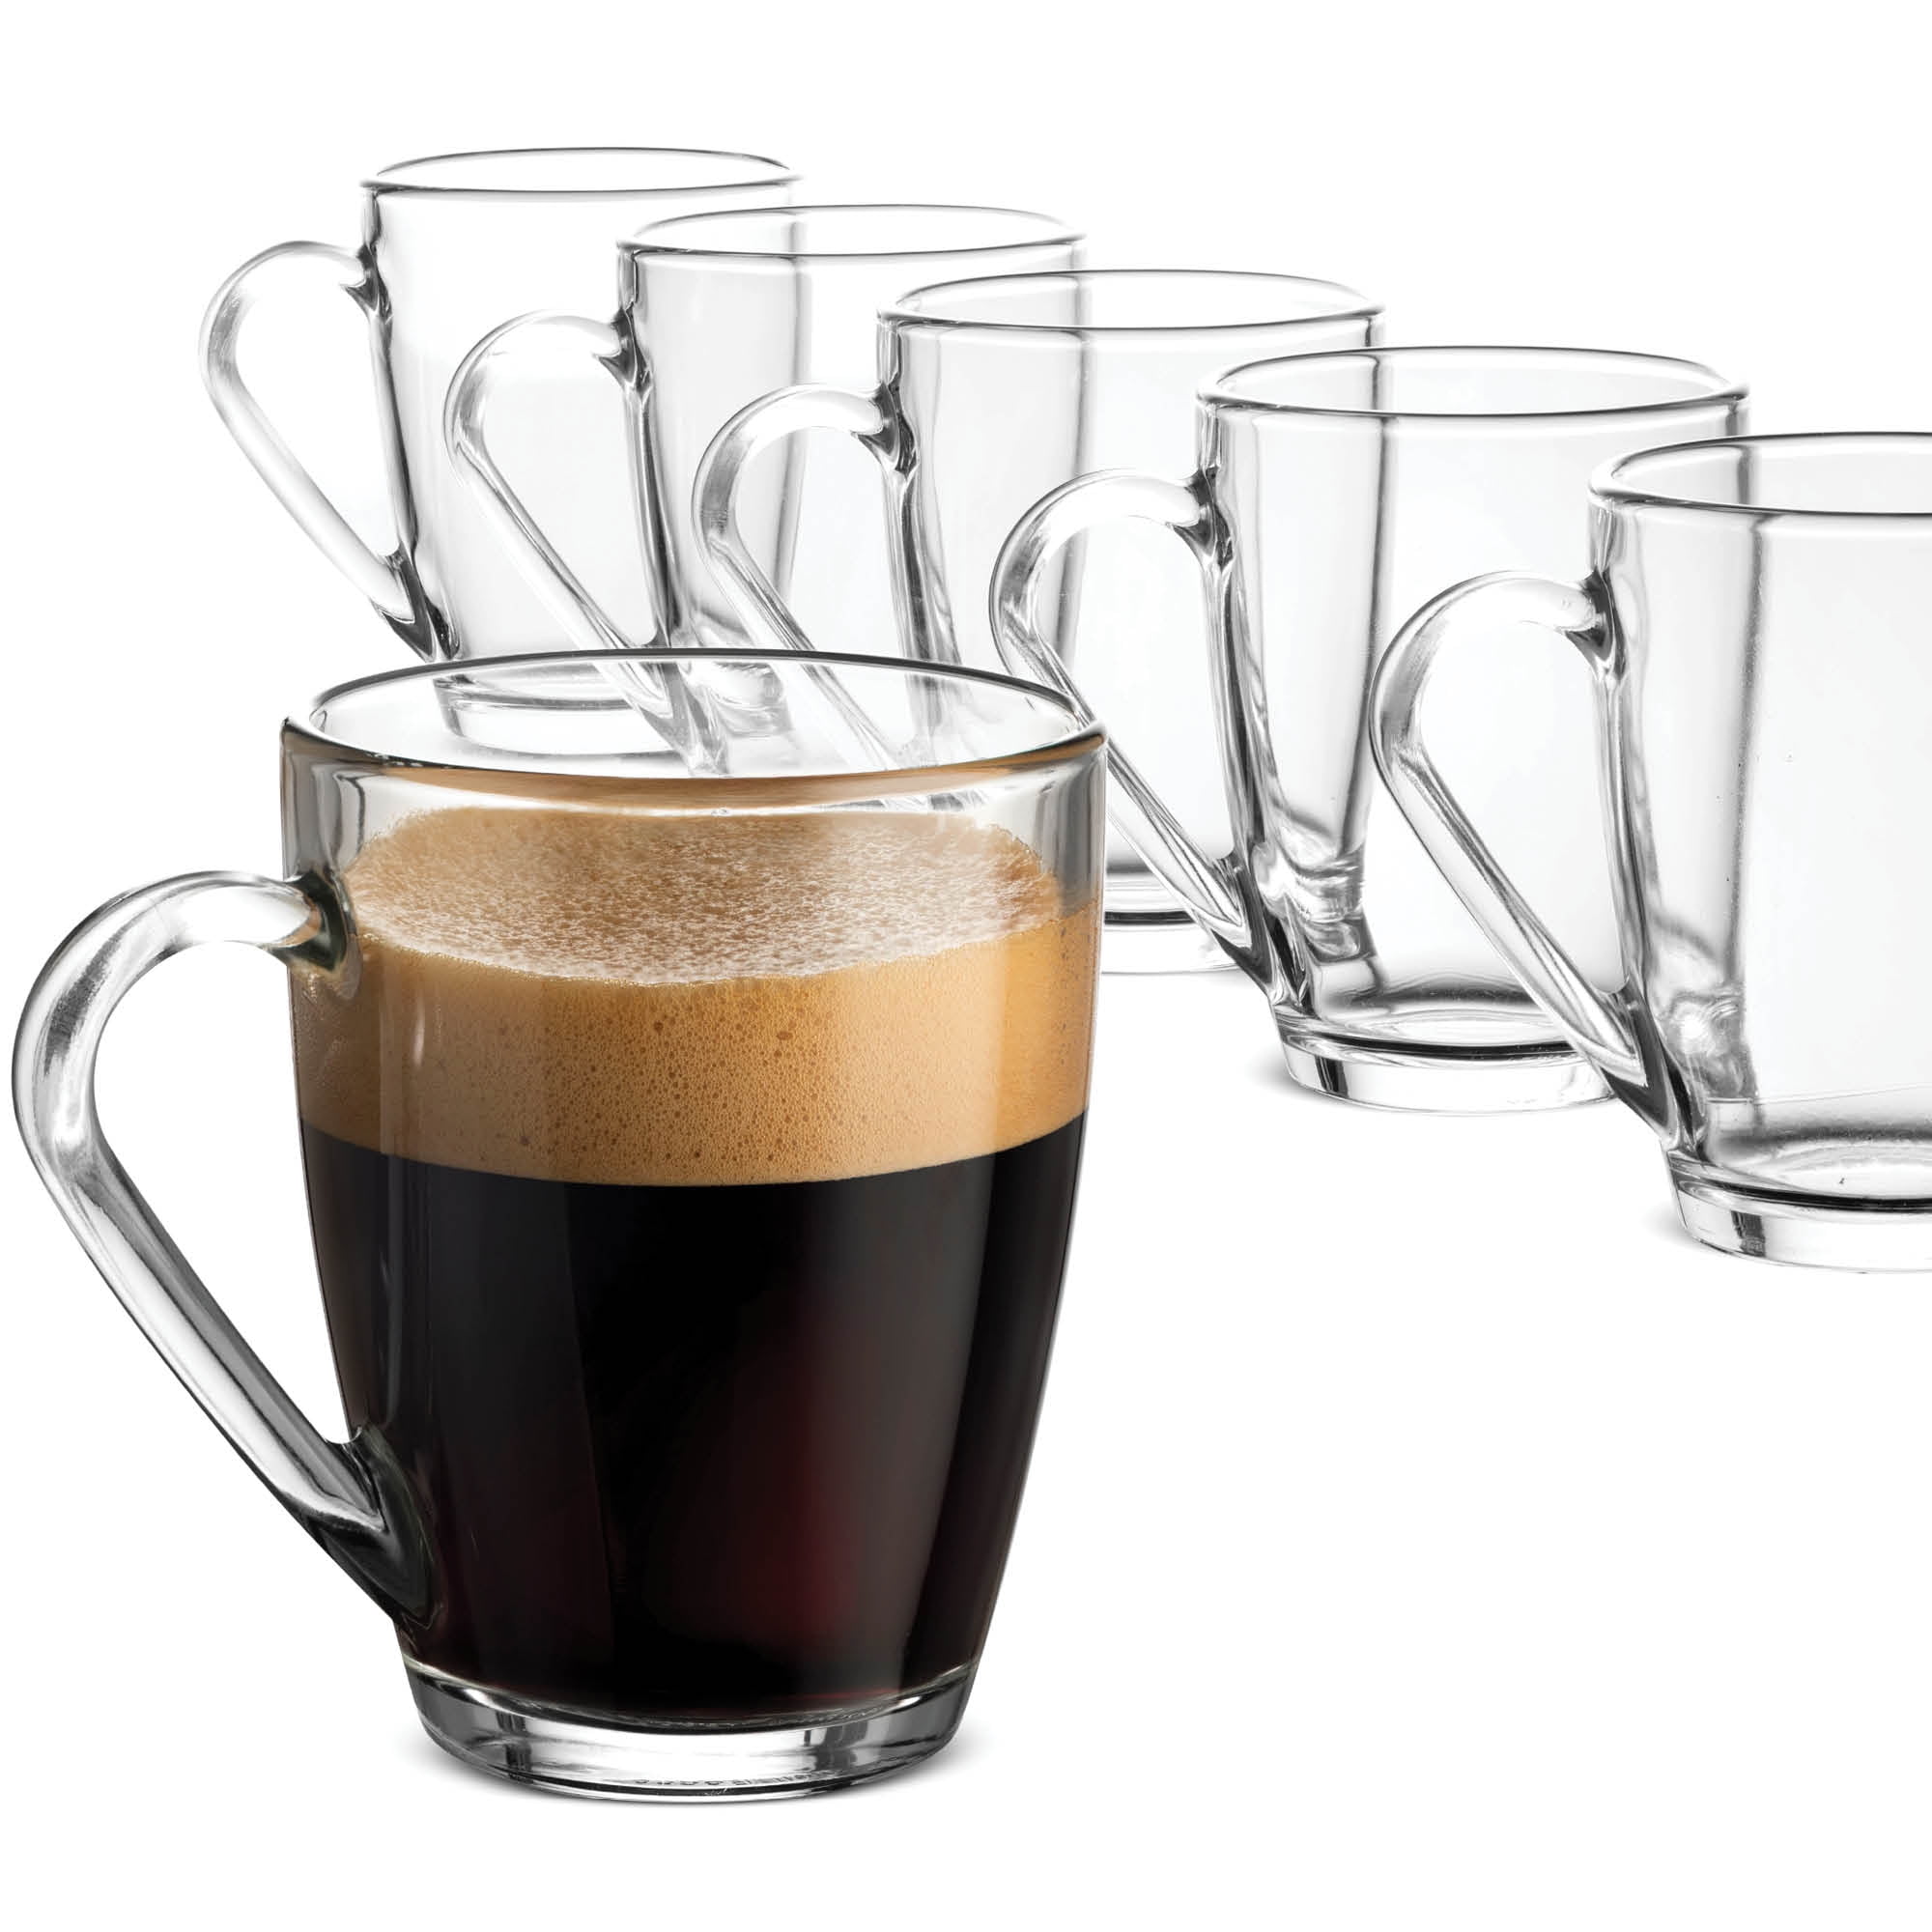 Glass Coffee Mug 10 &frac34; Ounce (6 Pack) with Convenient Handle, Tea Glasses for hot and cold beverages, Thermal Shock Resistant, Tempered Glass, Great for Cappuccino, Latte, Espresso